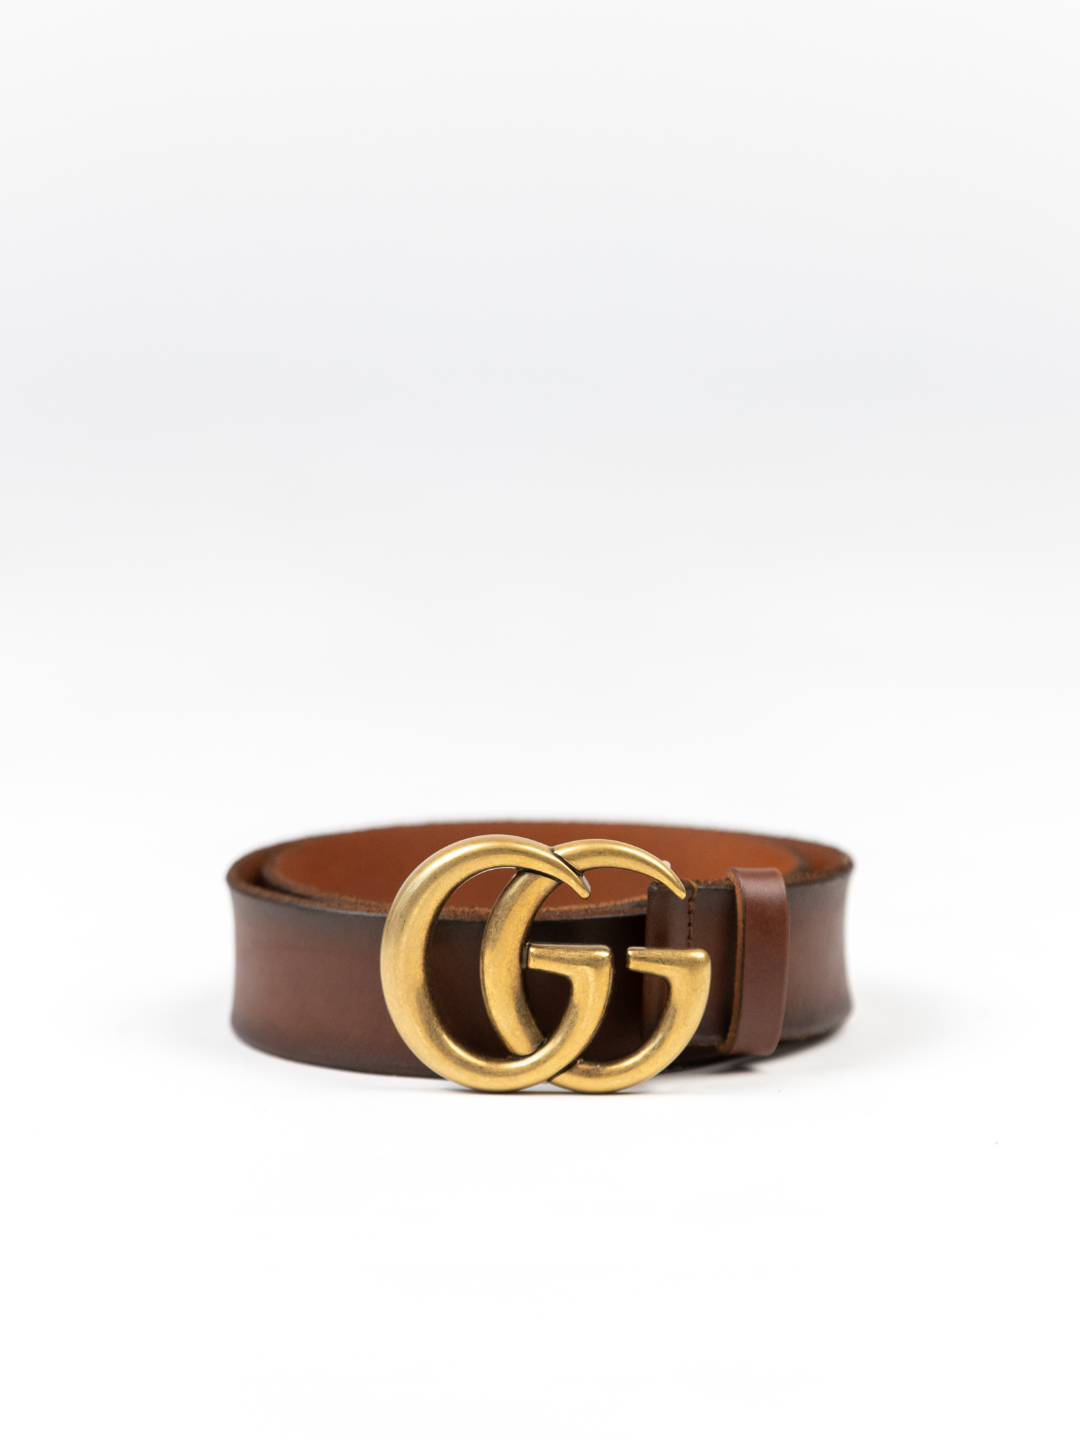 GG Buckle Brown Leather Belt